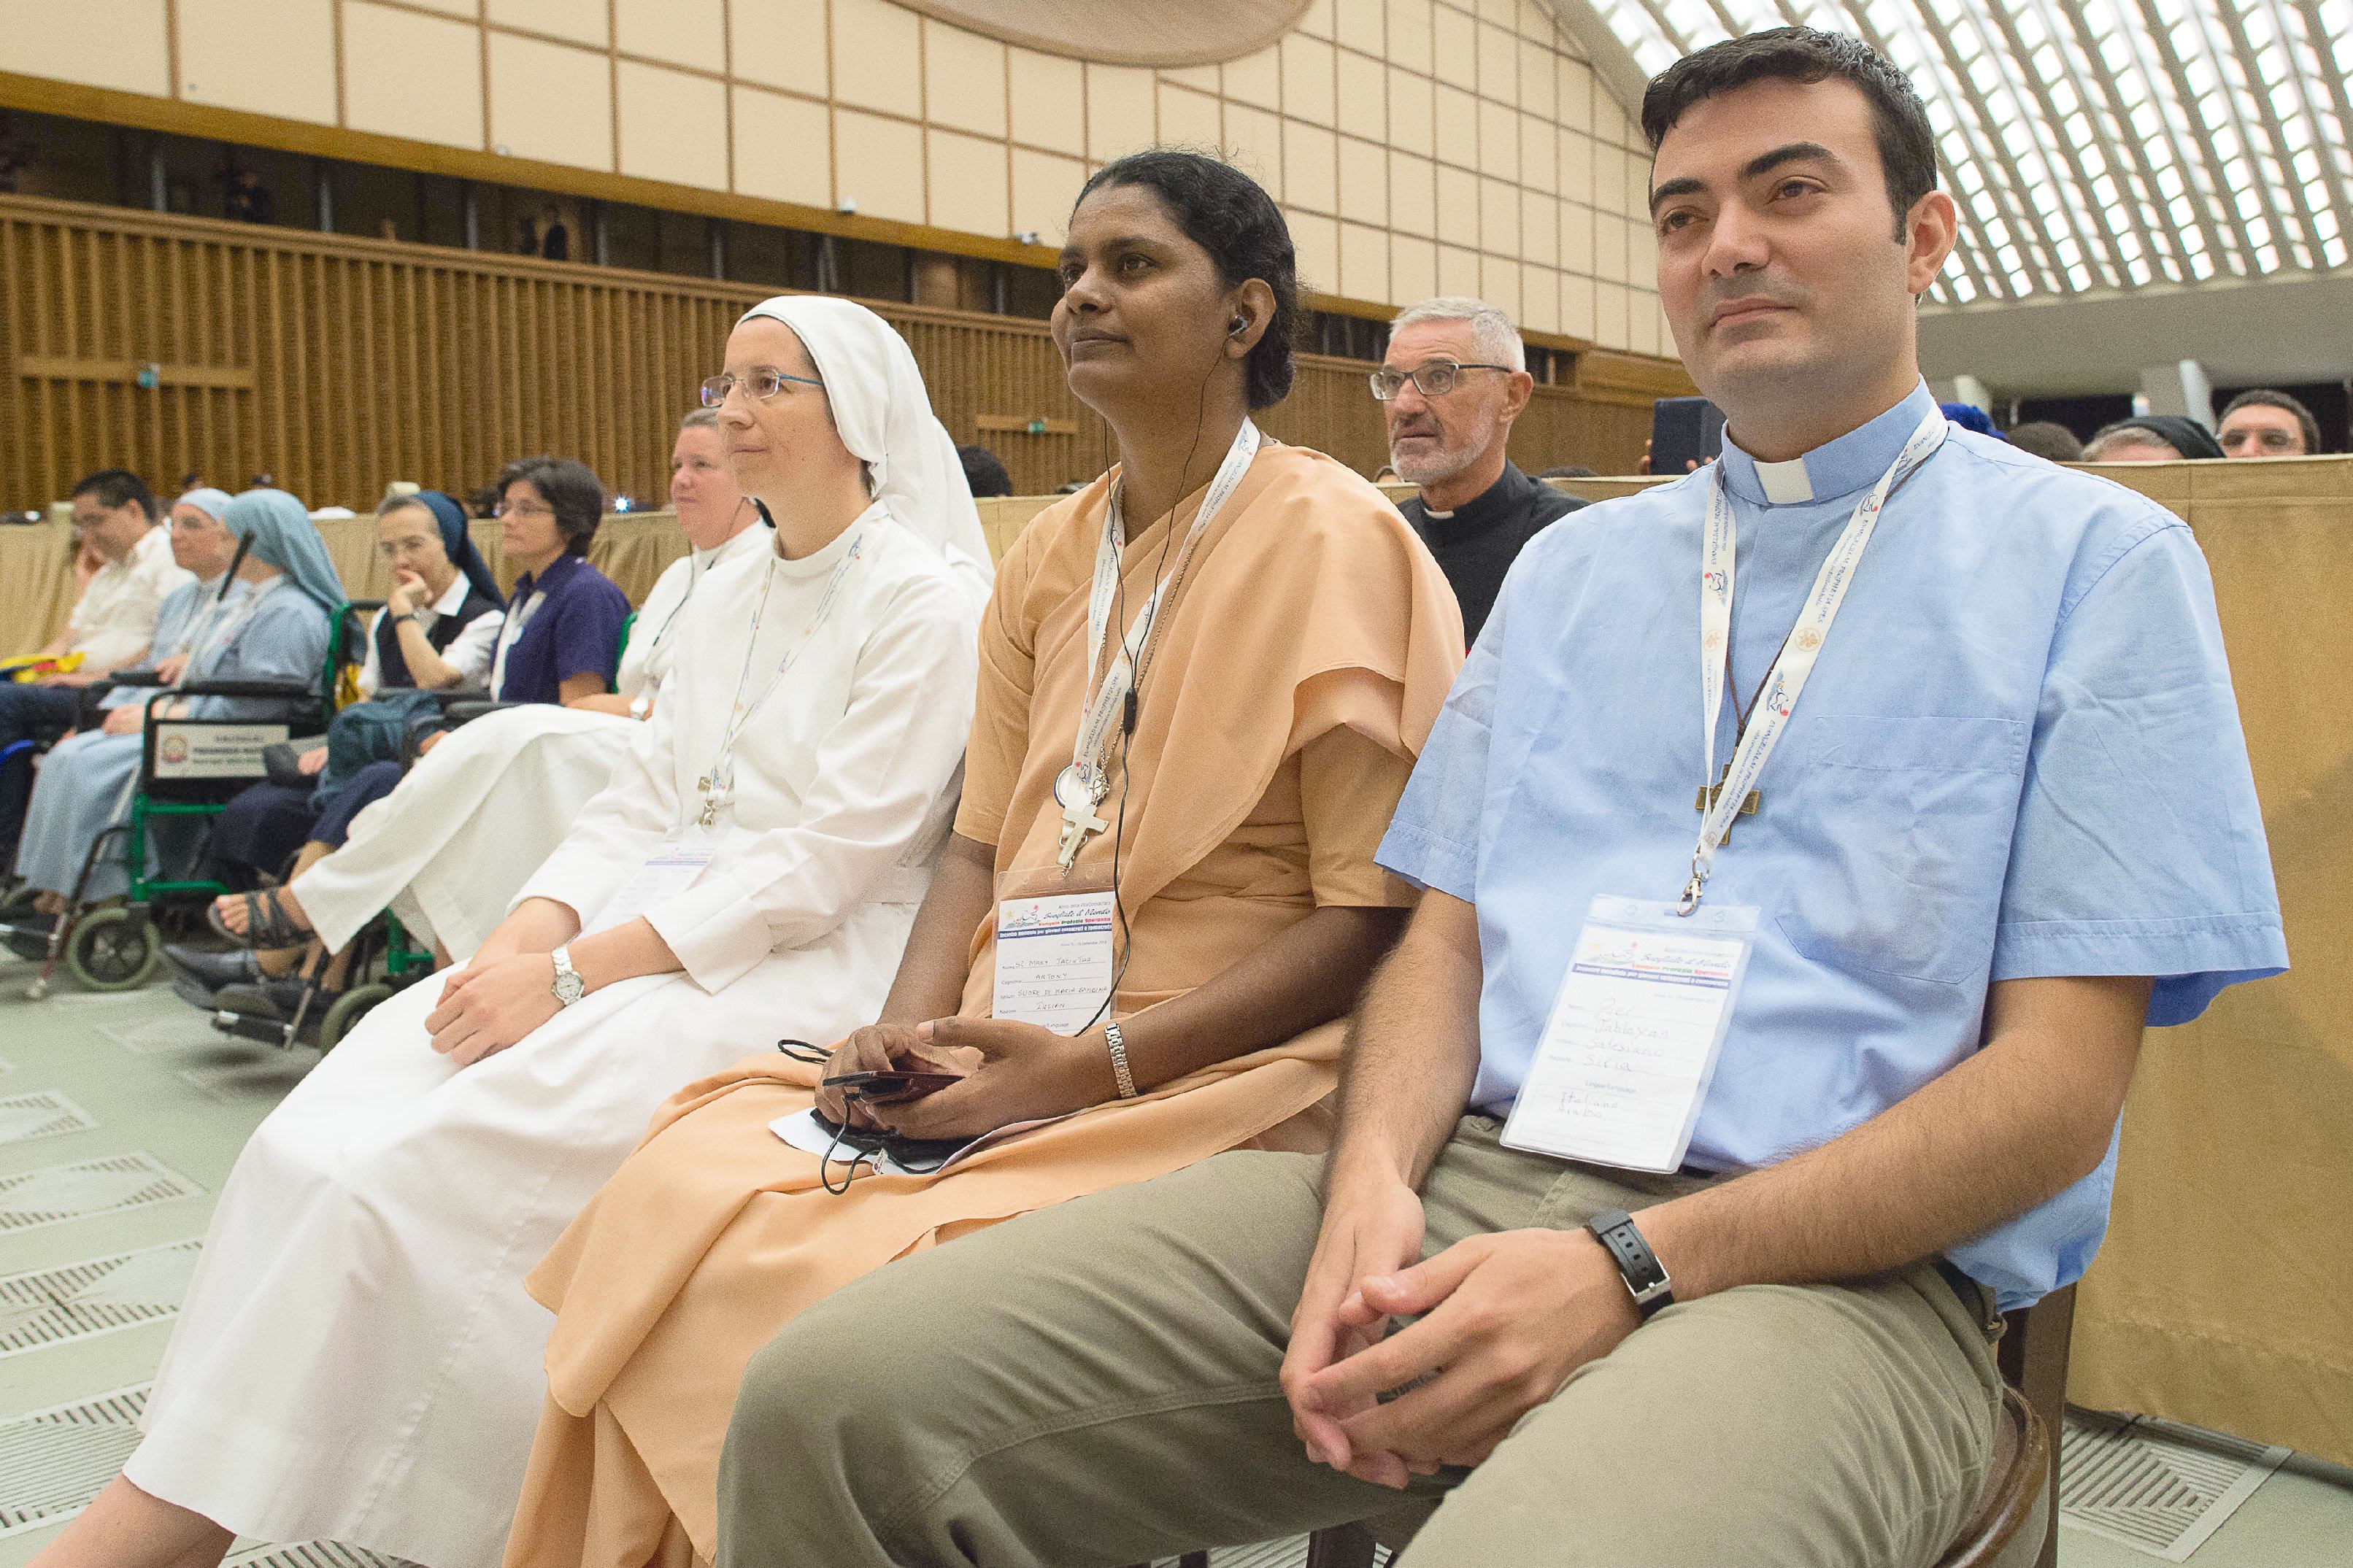 Papal audience with young consacrated men and women